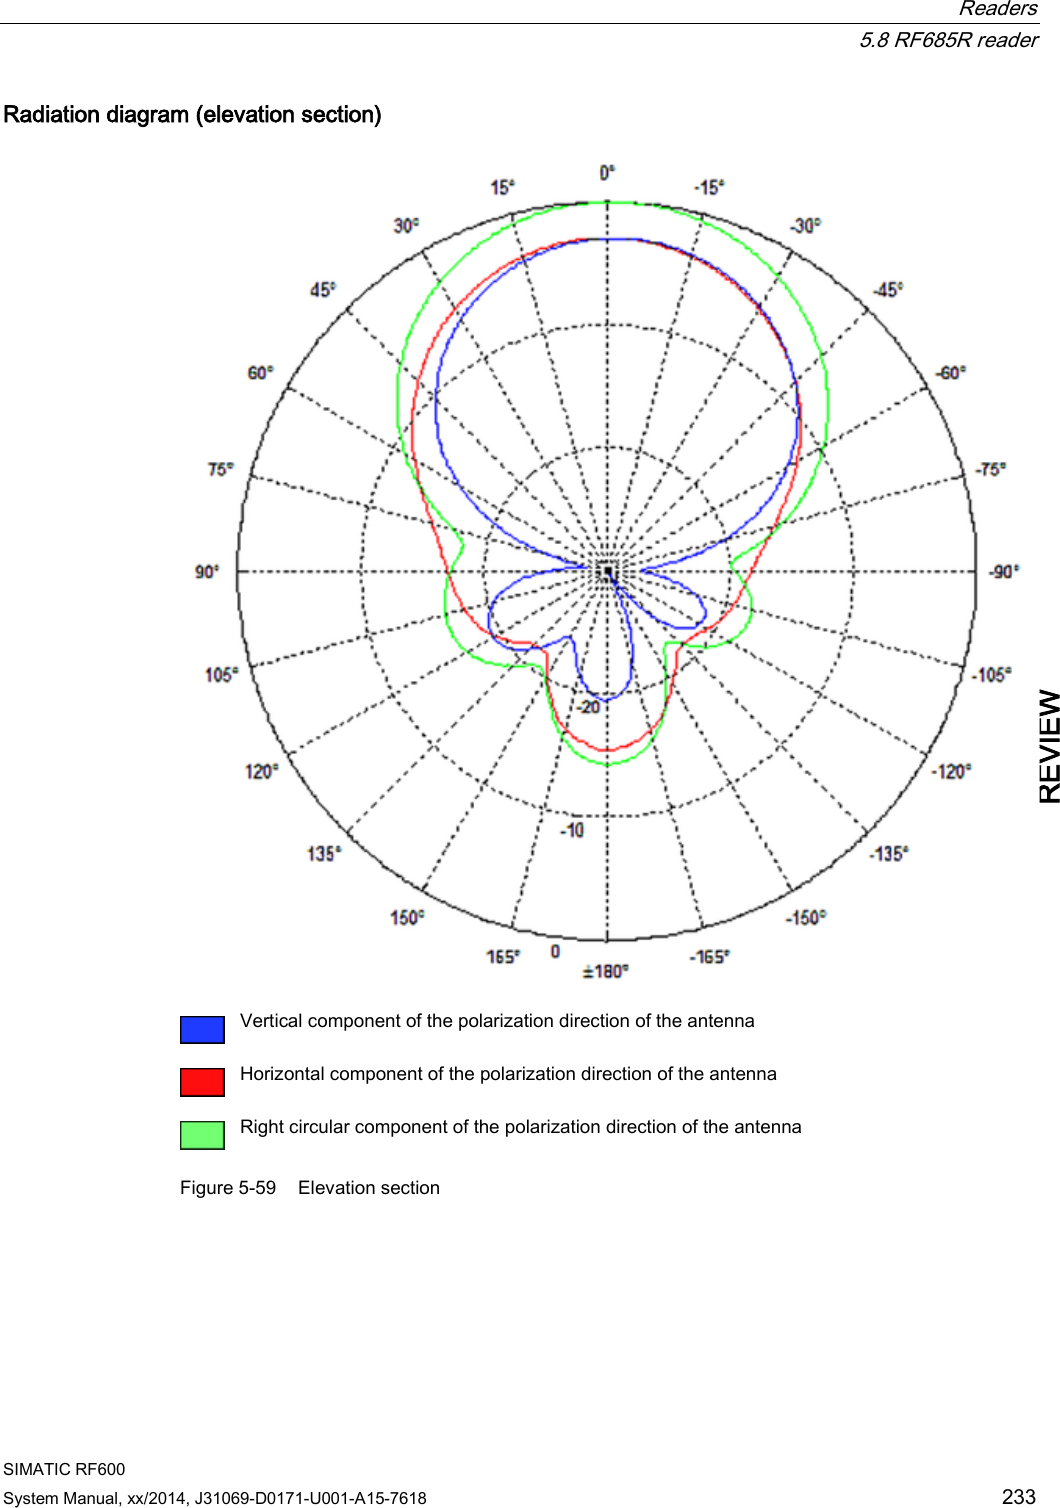  Readers  5.8 RF685R reader SIMATIC RF600 System Manual, xx/2014, J31069-D0171-U001-A15-7618 233 REVIEW Radiation diagram (elevation section)   Vertical component of the polarization direction of the antenna  Horizontal component of the polarization direction of the antenna  Right circular component of the polarization direction of the antenna Figure 5-59 Elevation section 